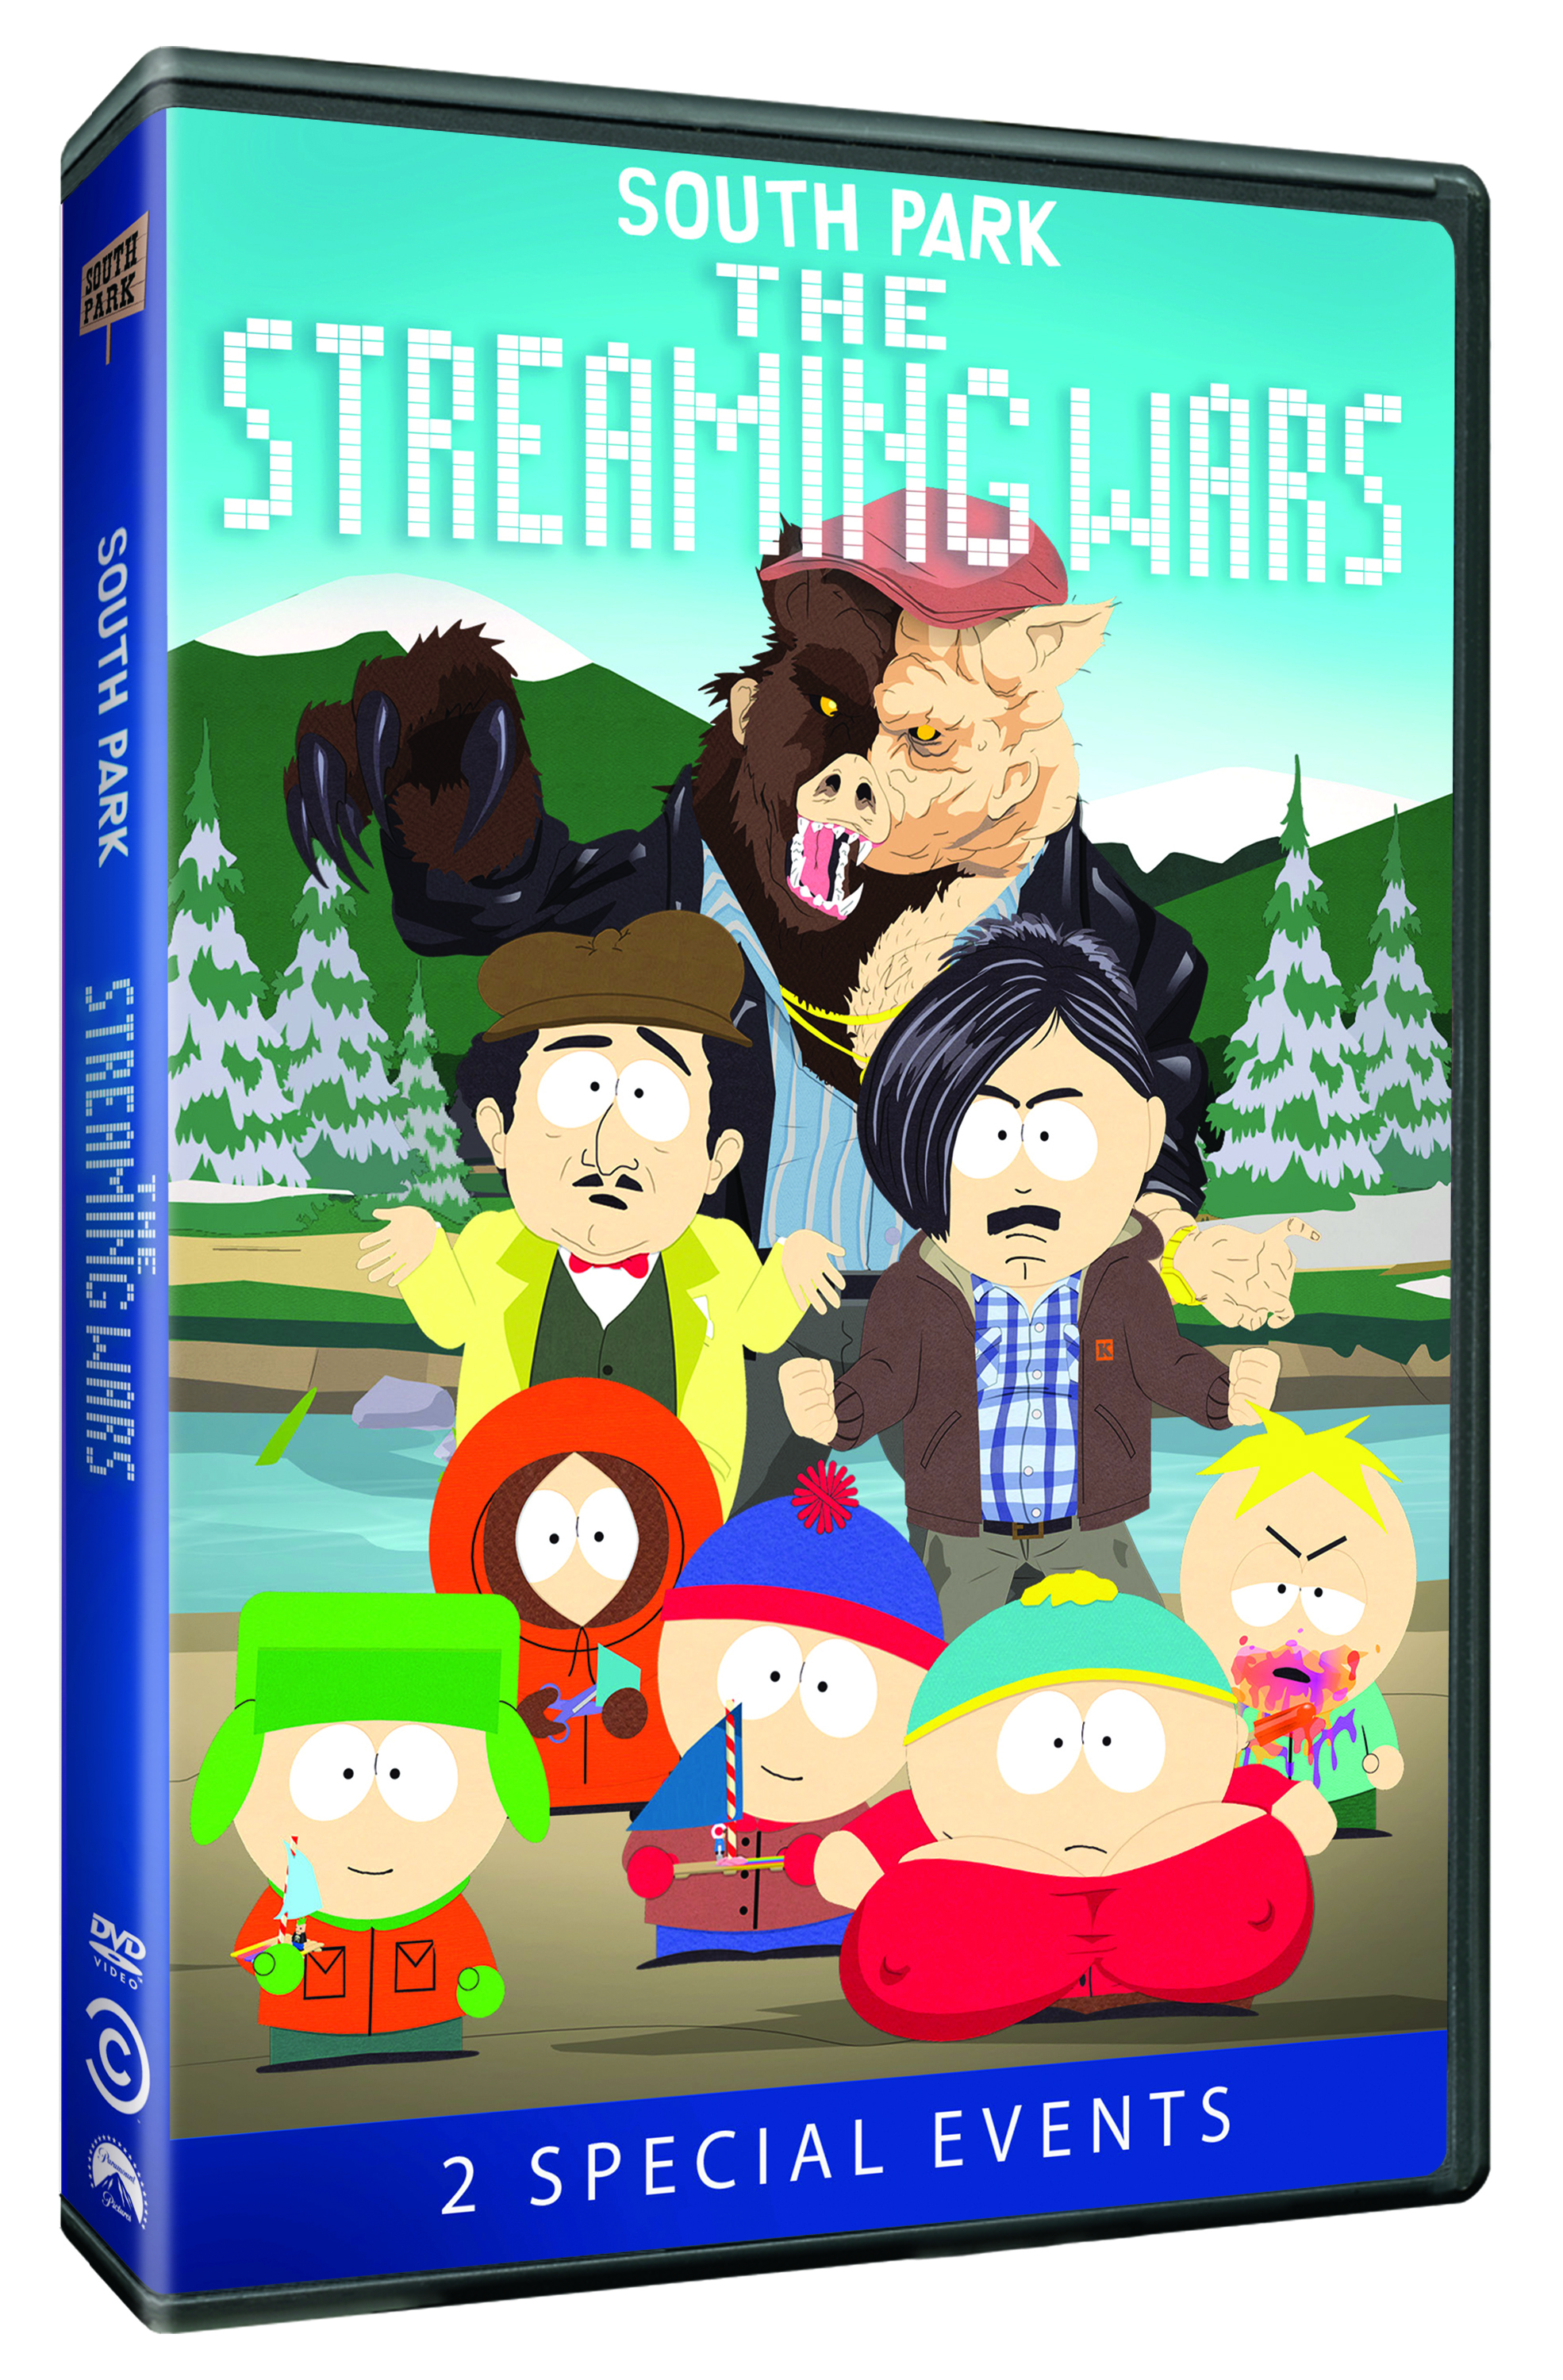 South Park: The Streaming Wars DVD cover (Paramount Home Entertainment)